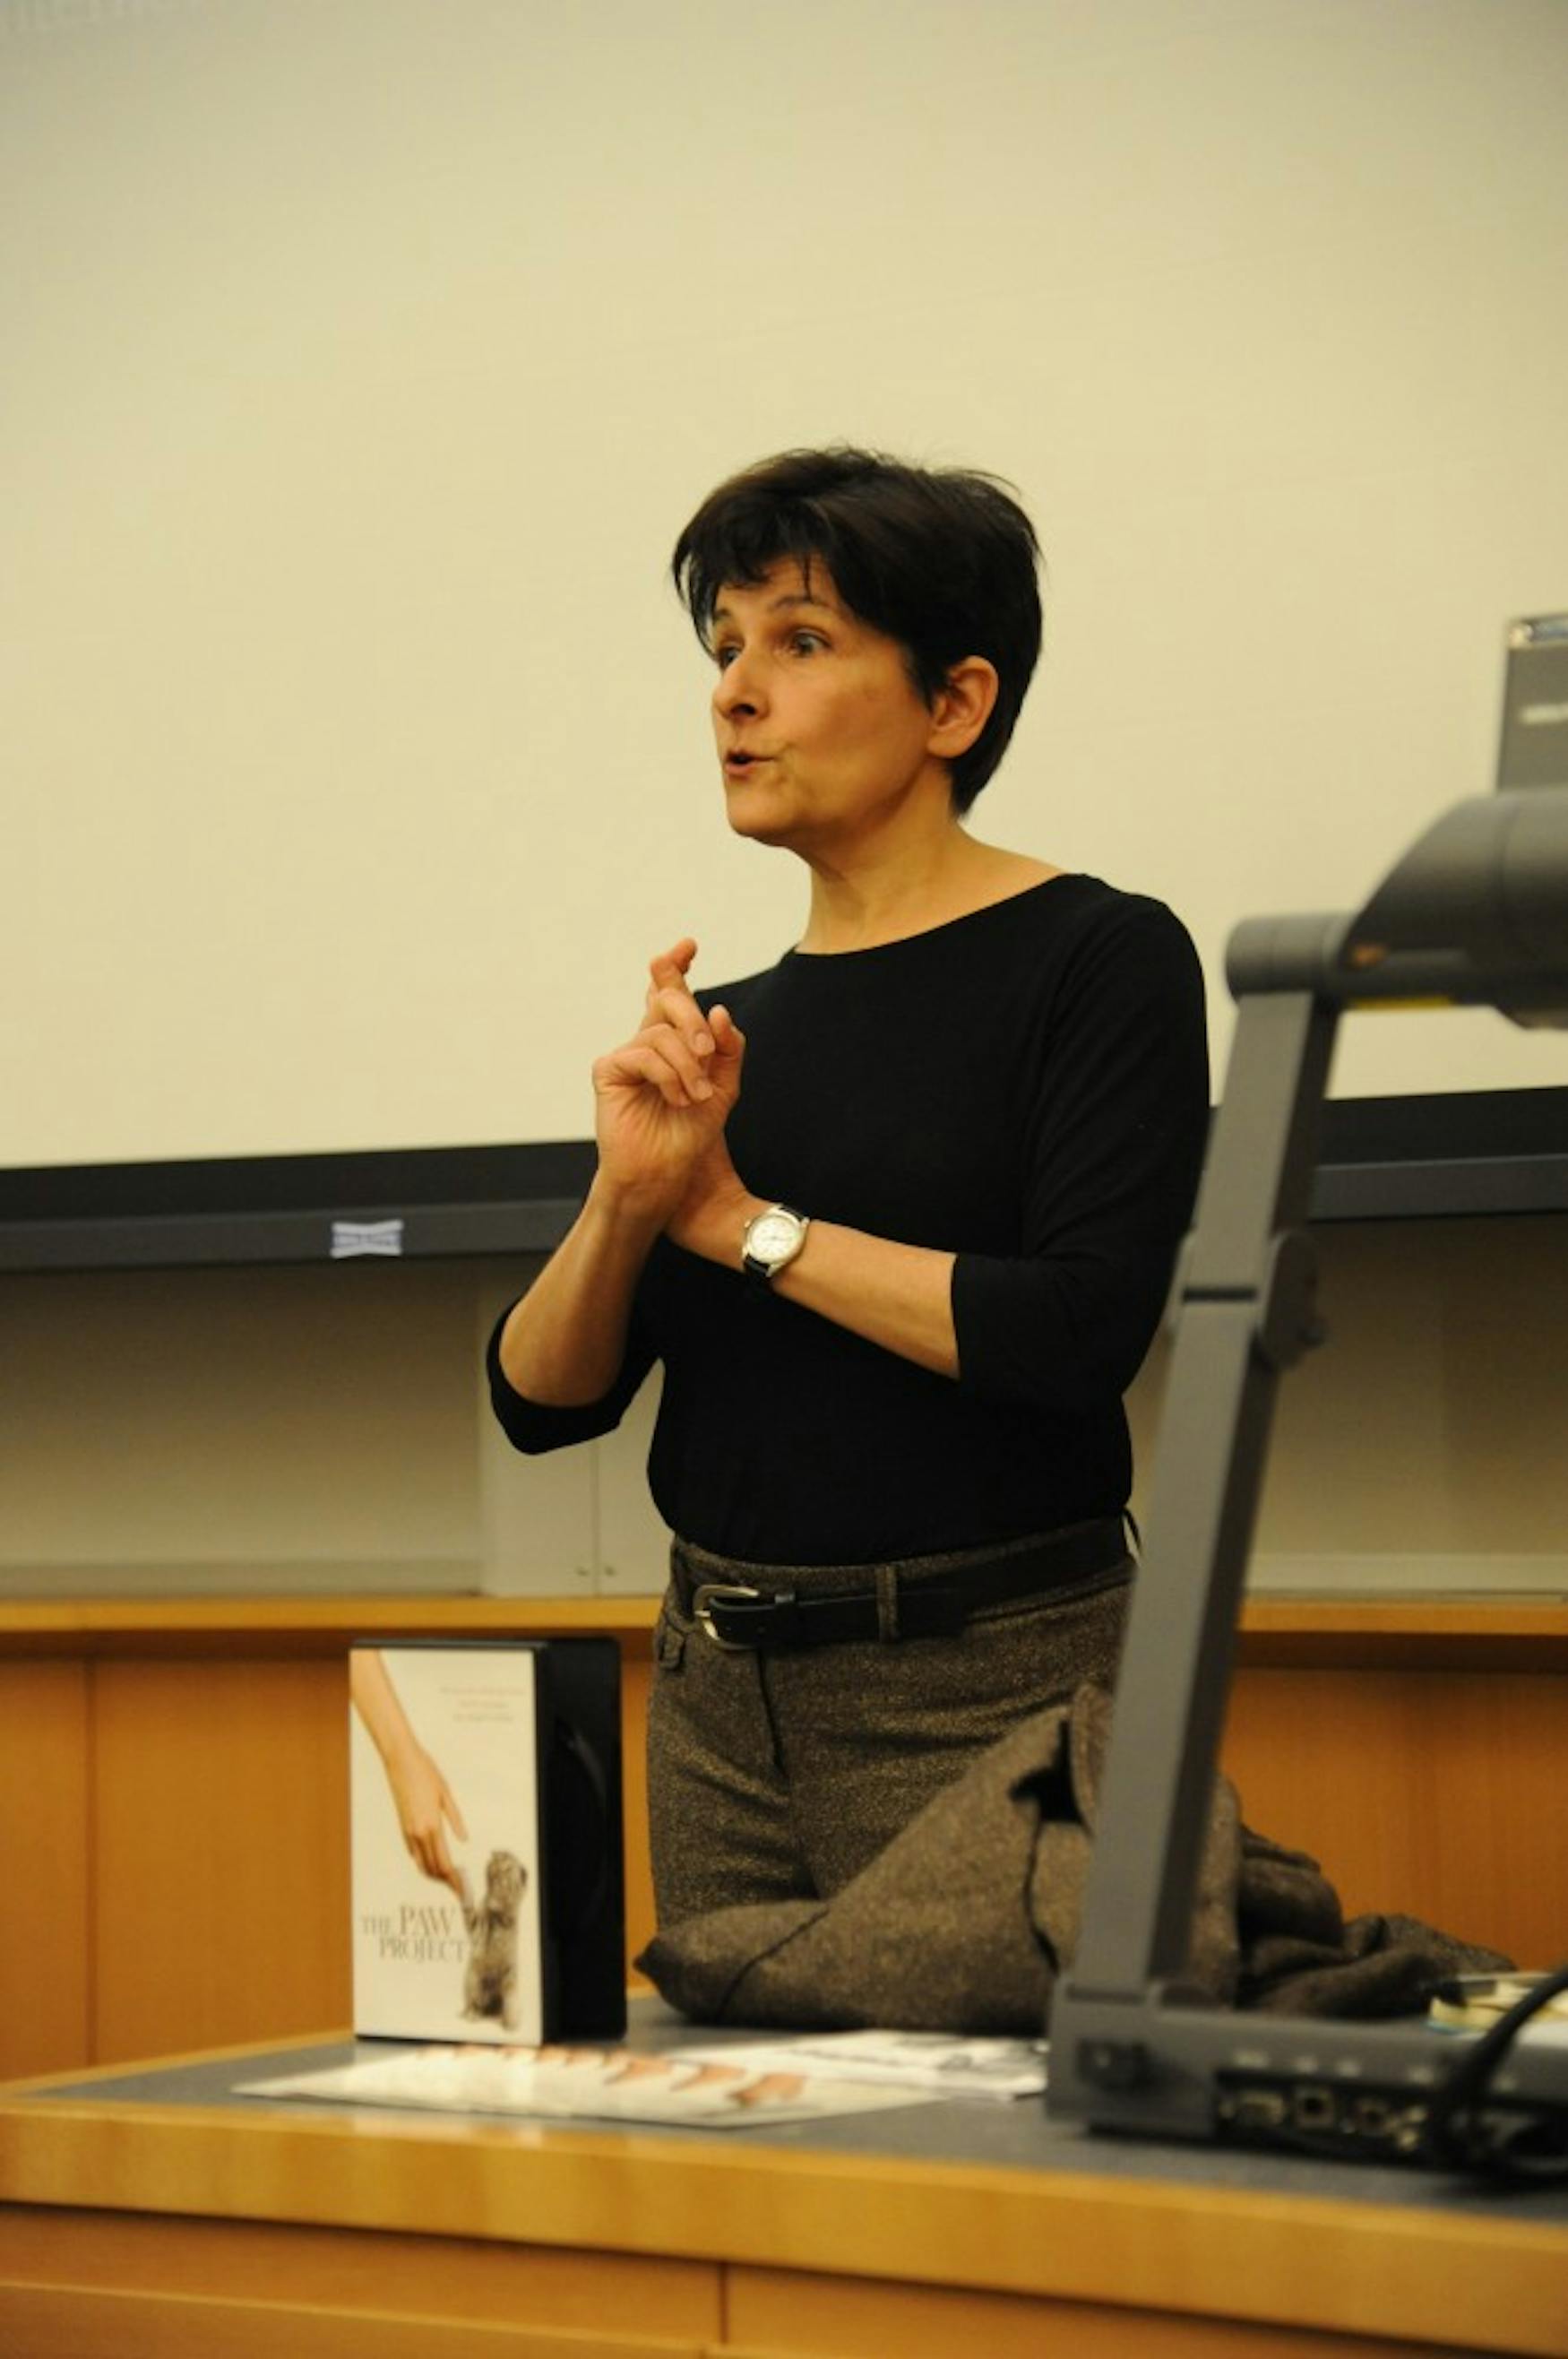 Animal behaviorist Dr. Stephanie Born-Weil discussed declawing and answered audience question on ‘The Paw Project.’